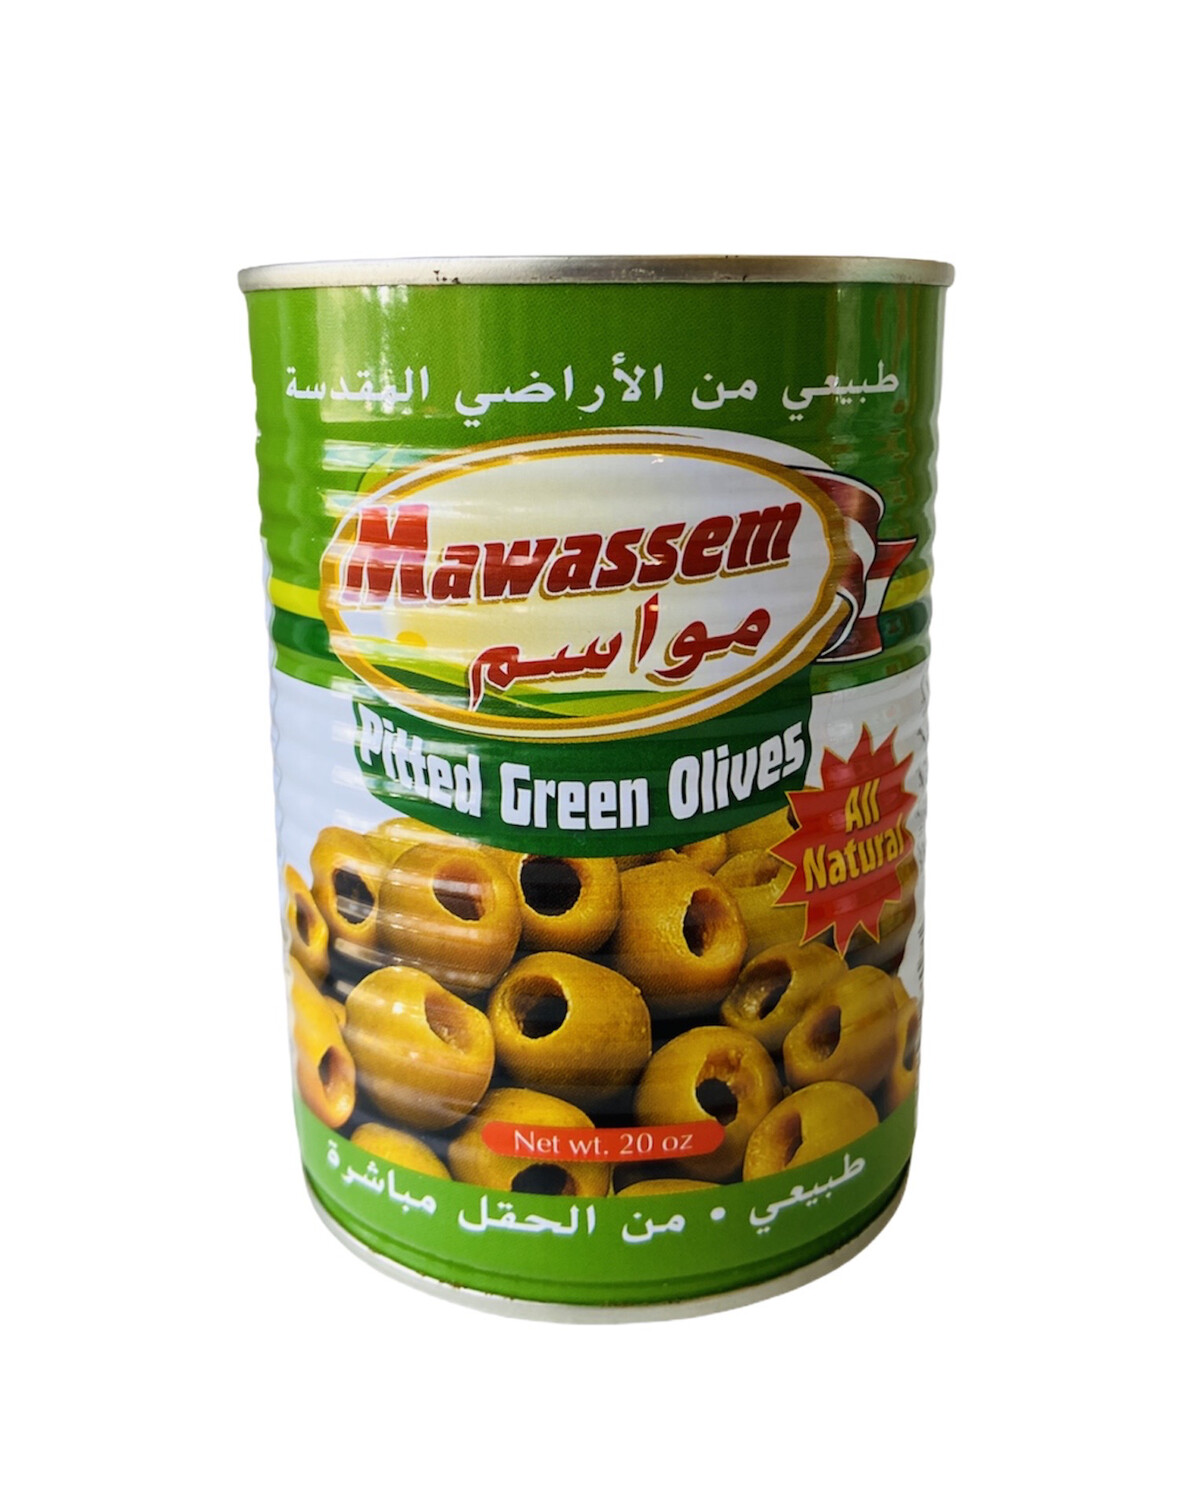 Mawassem Pitted Green Olives 12x1lb